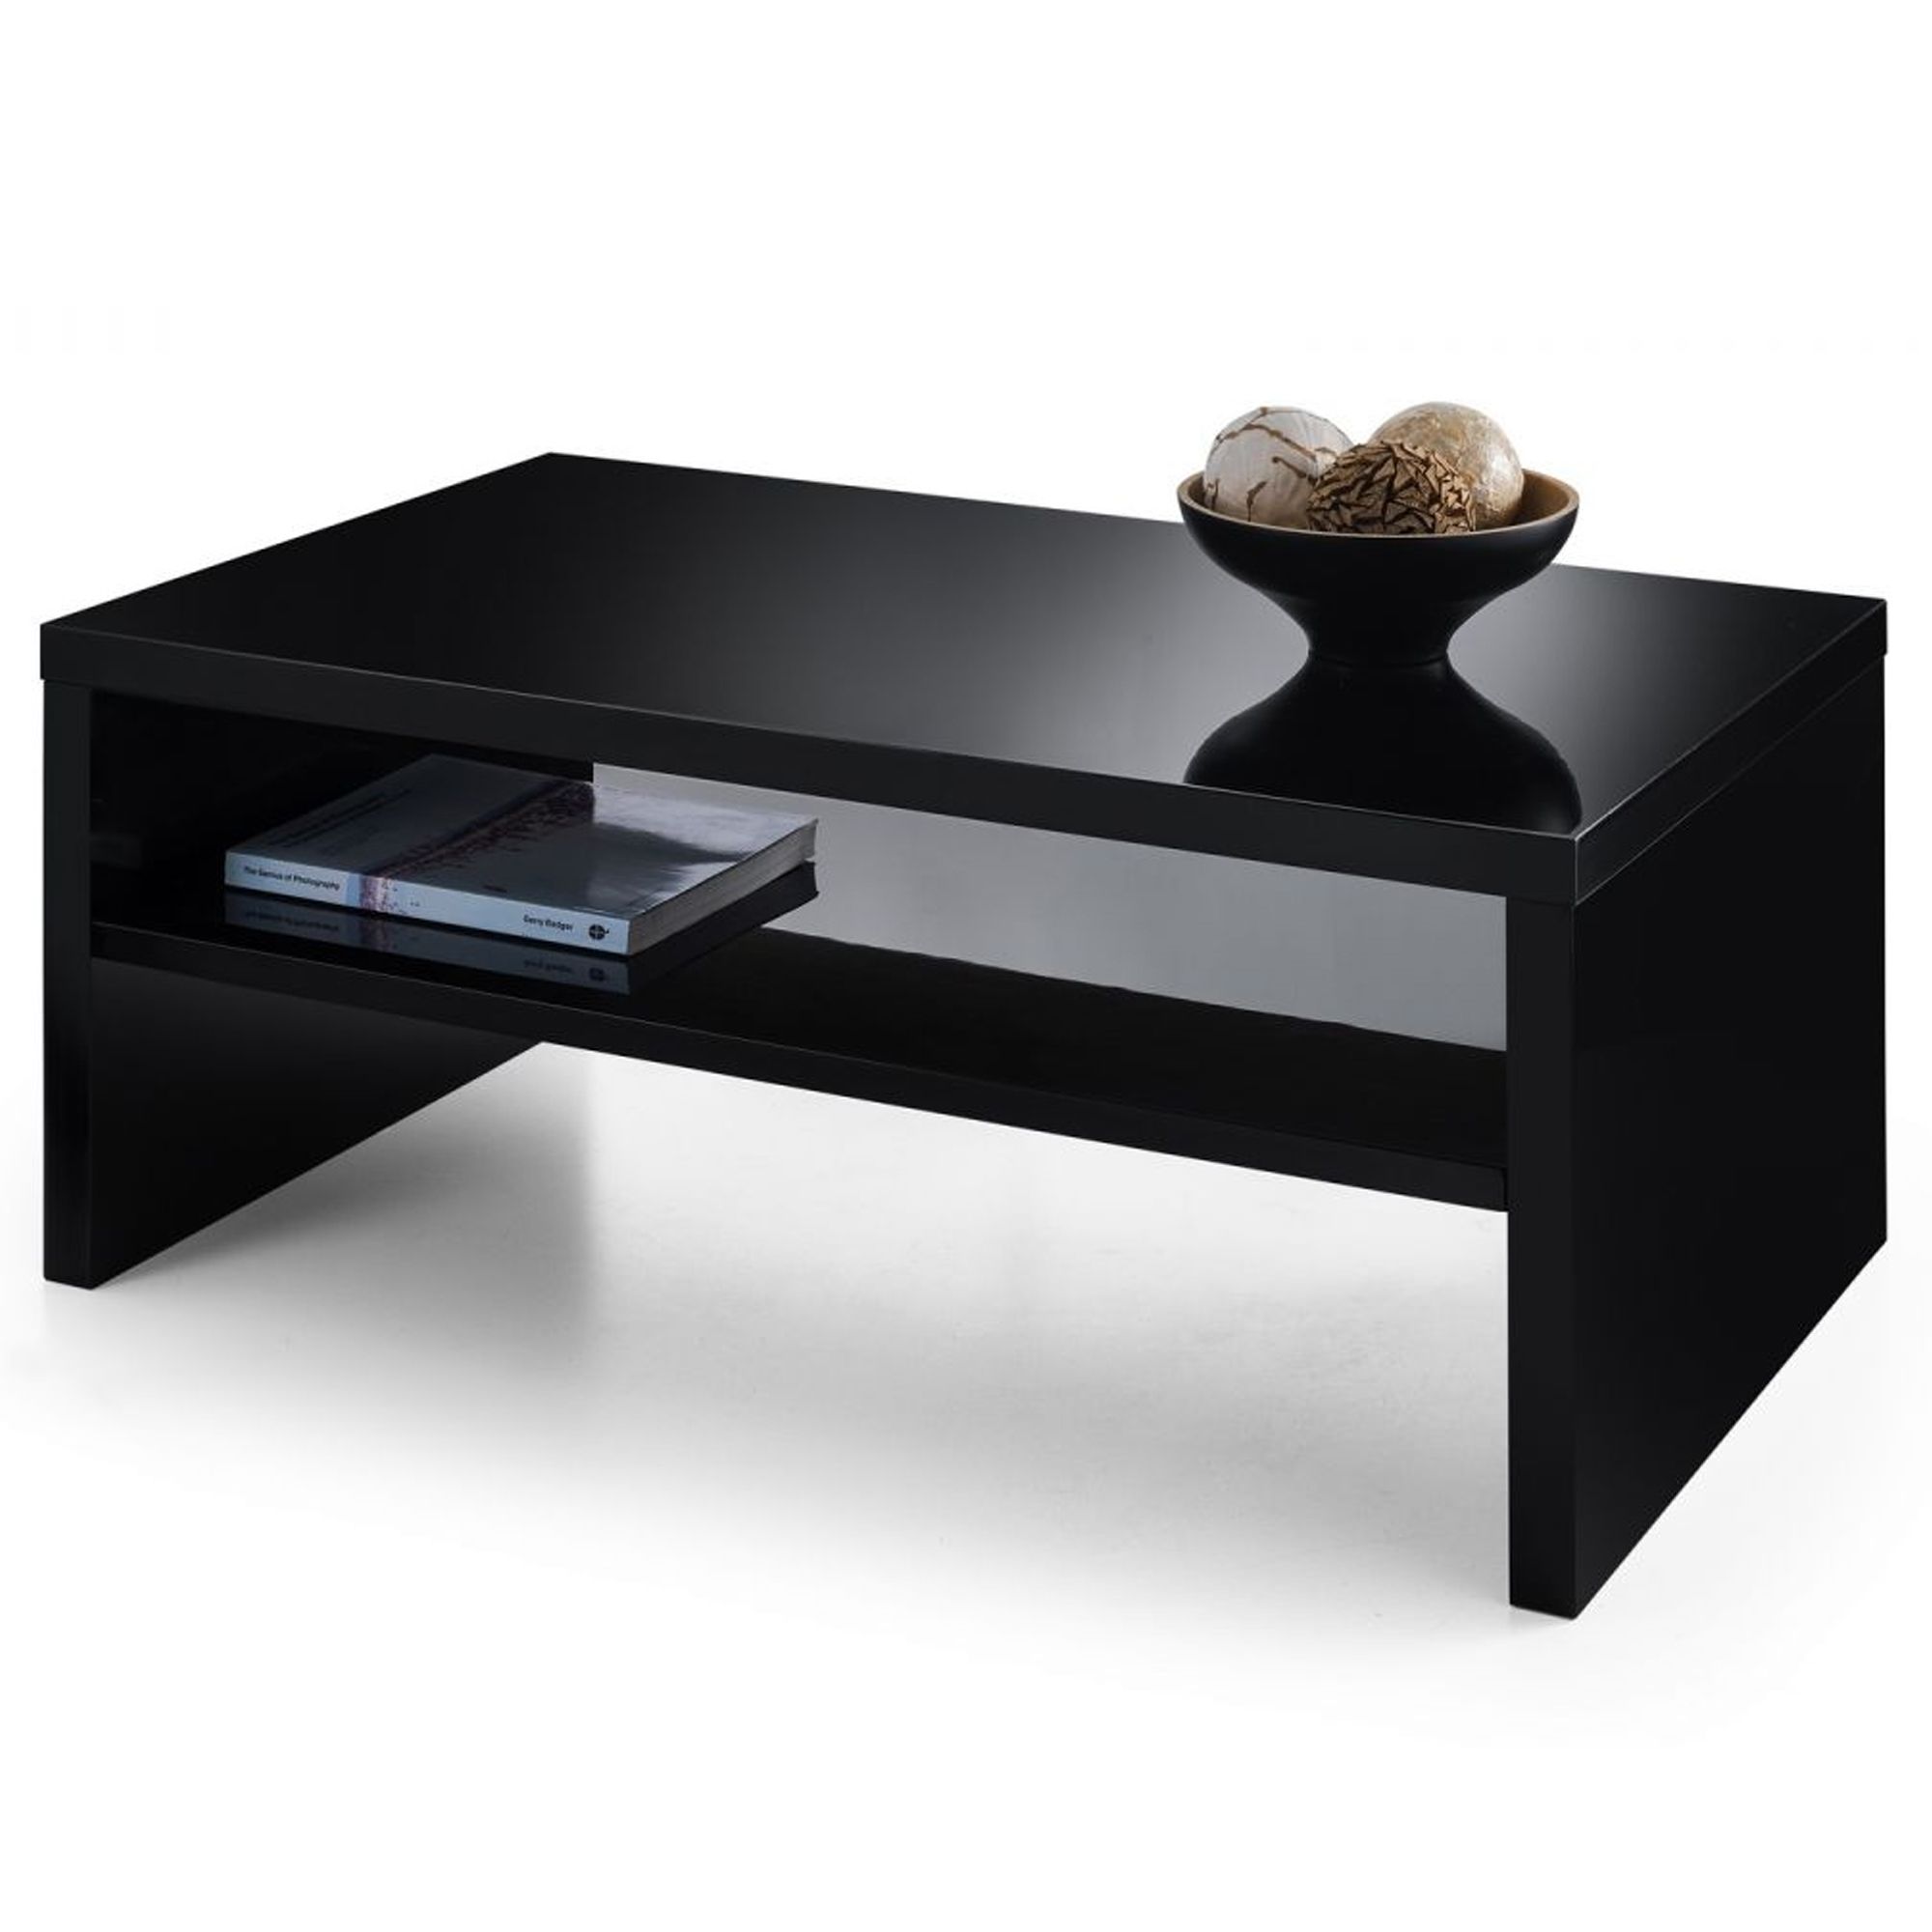 Black Metro High Gloss Coffee Table | Contemporary Lounge Furniture Pertaining To High Gloss Black Coffee Tables (View 4 of 15)